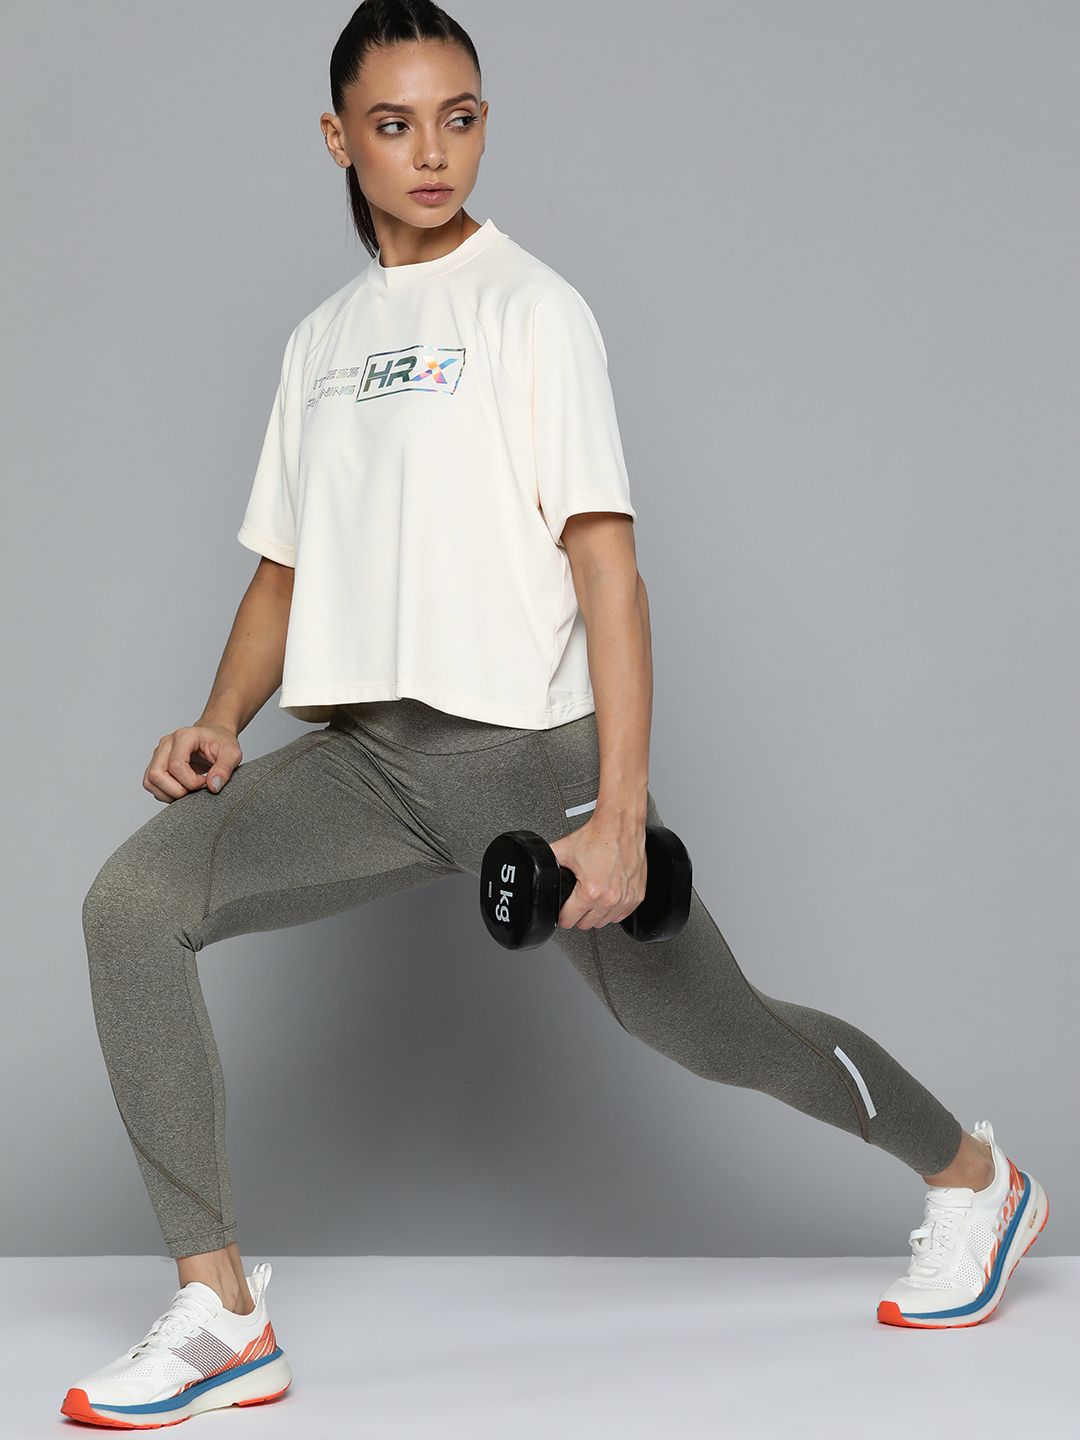 HRX By Hrithik Roshan Training Women Optic White Rapid-Dry Solid Tshirts Price in India